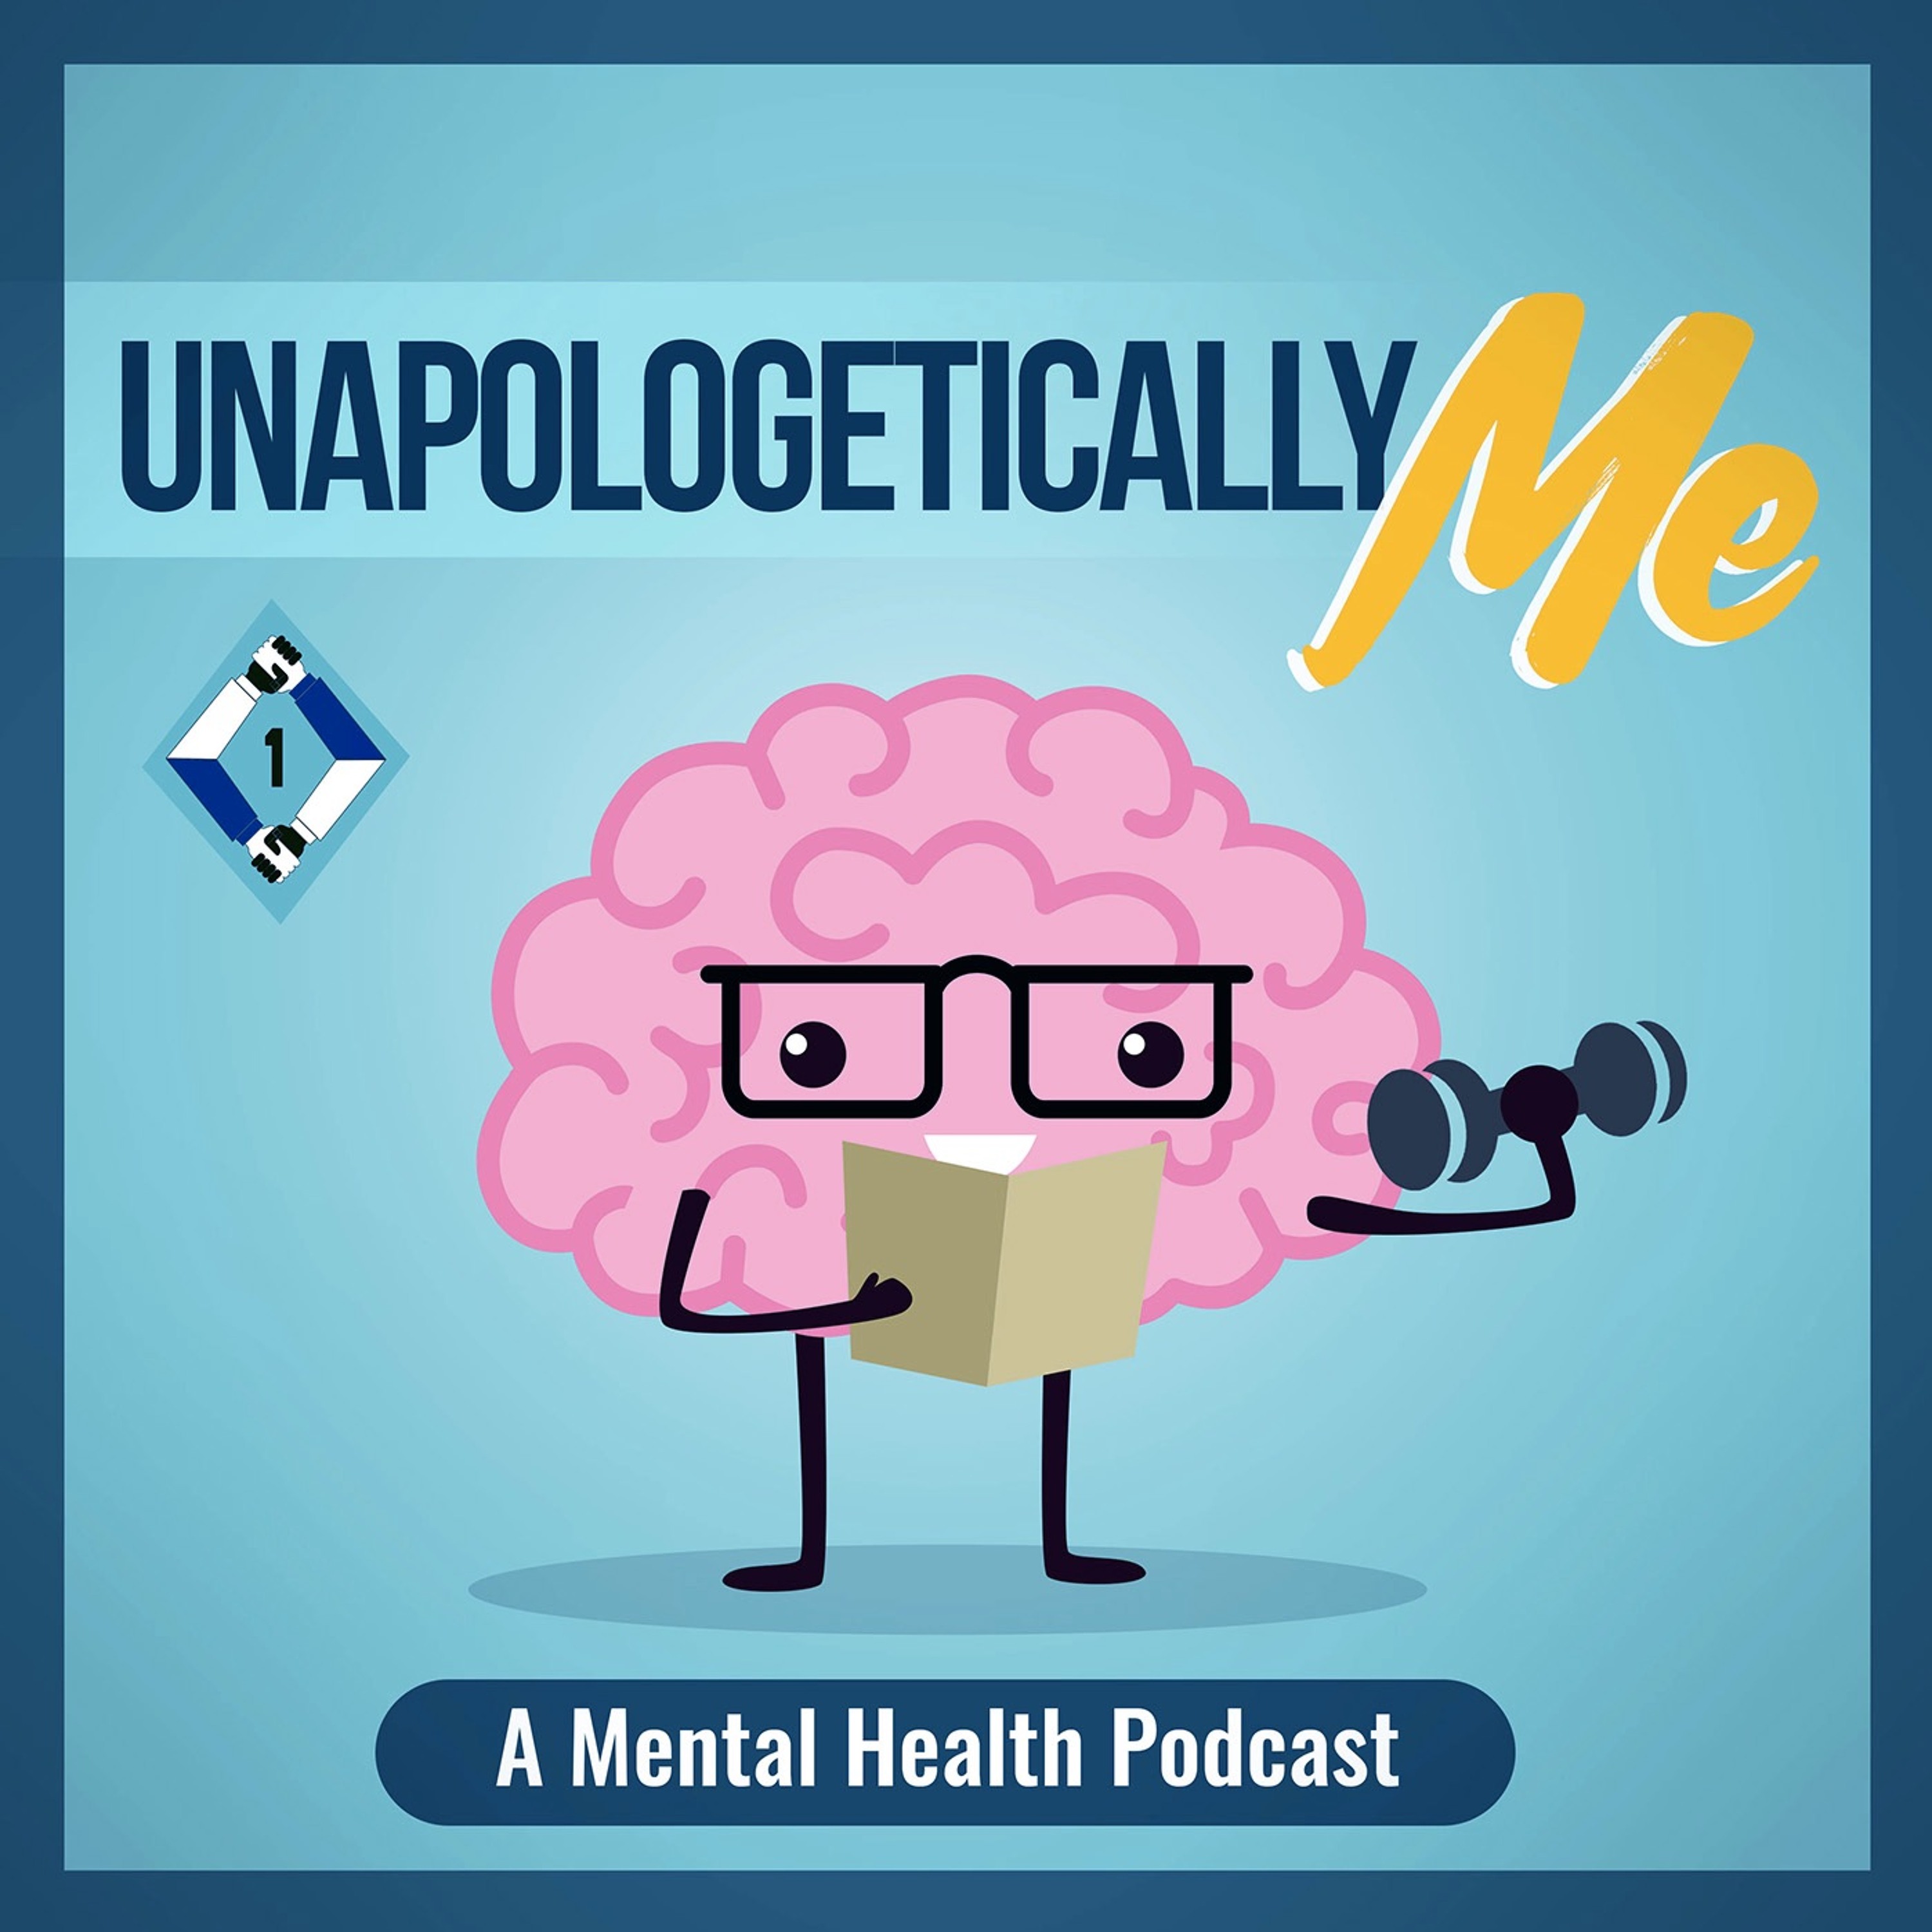 Unapologetically Me: A Mental Health Podcast - Giving Challenge